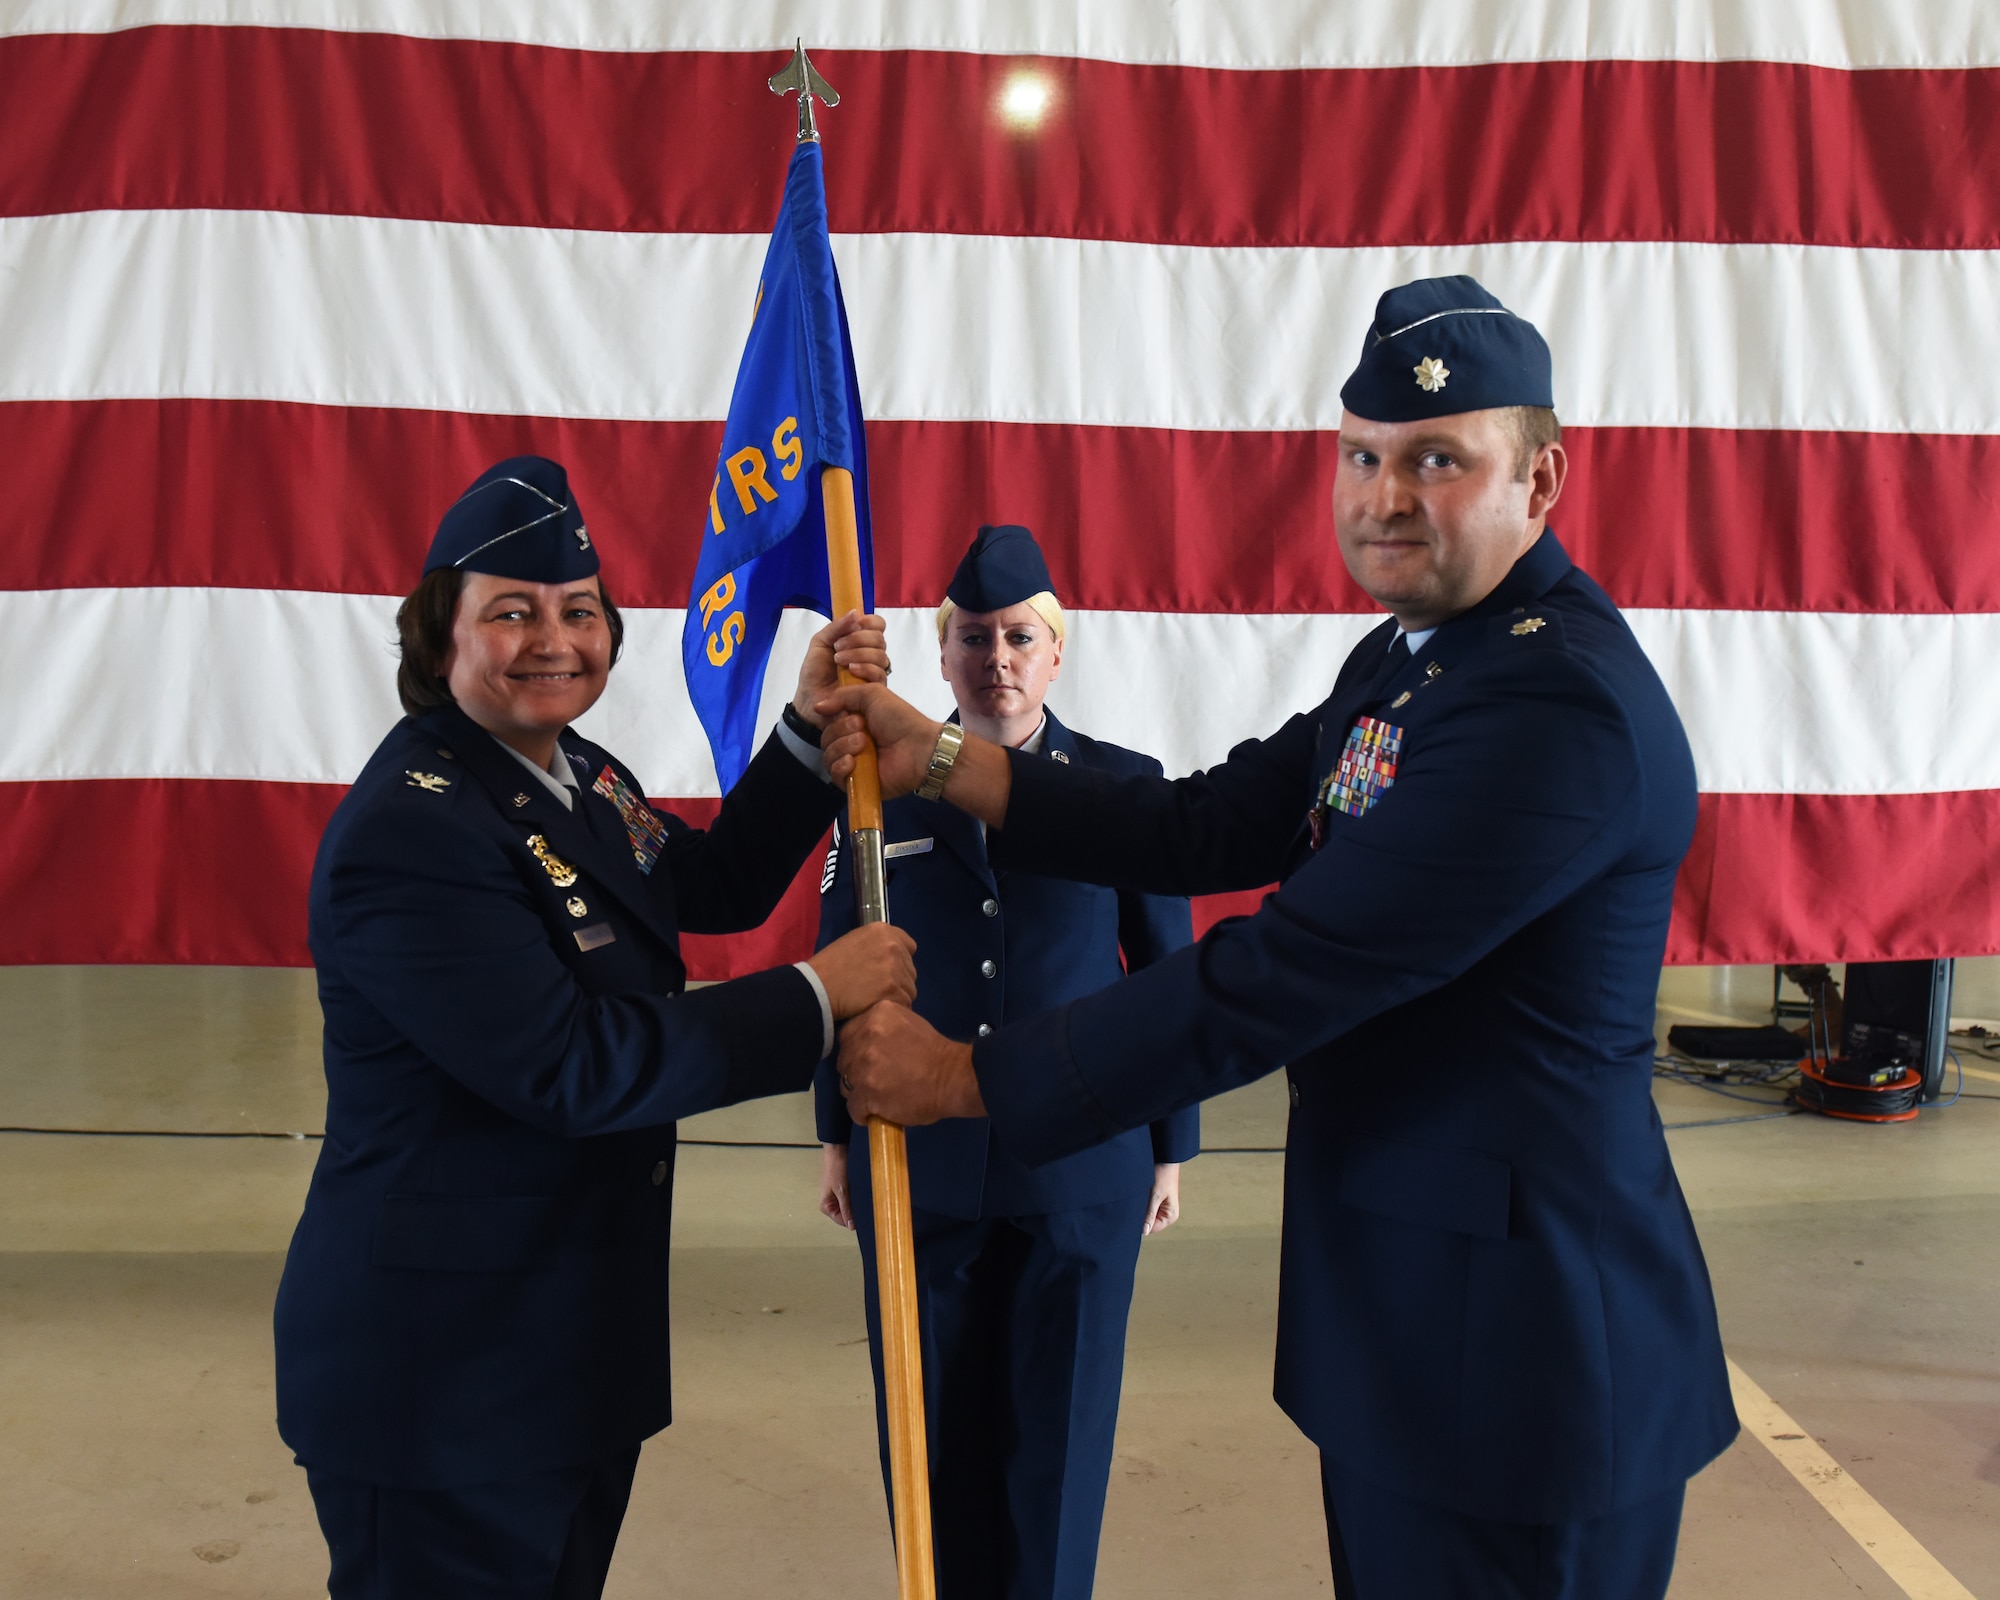 U.S. Air Force Lt. Col. John Bergmans, right, 315th Training Squadron outgoing commander, relinquishes command to Col. Angelina Maguinness, 17th Training Group commander, during the 315th TRS change of command ceremony at Goodfellow Air Force Base, Texas, June 10, 2022. Passing the guidon physically represents the symbolism of passing the squadron responsibilities to the next commander. (U.S. Air Force photo by Airman 1st Class Zachary Heimbuch)